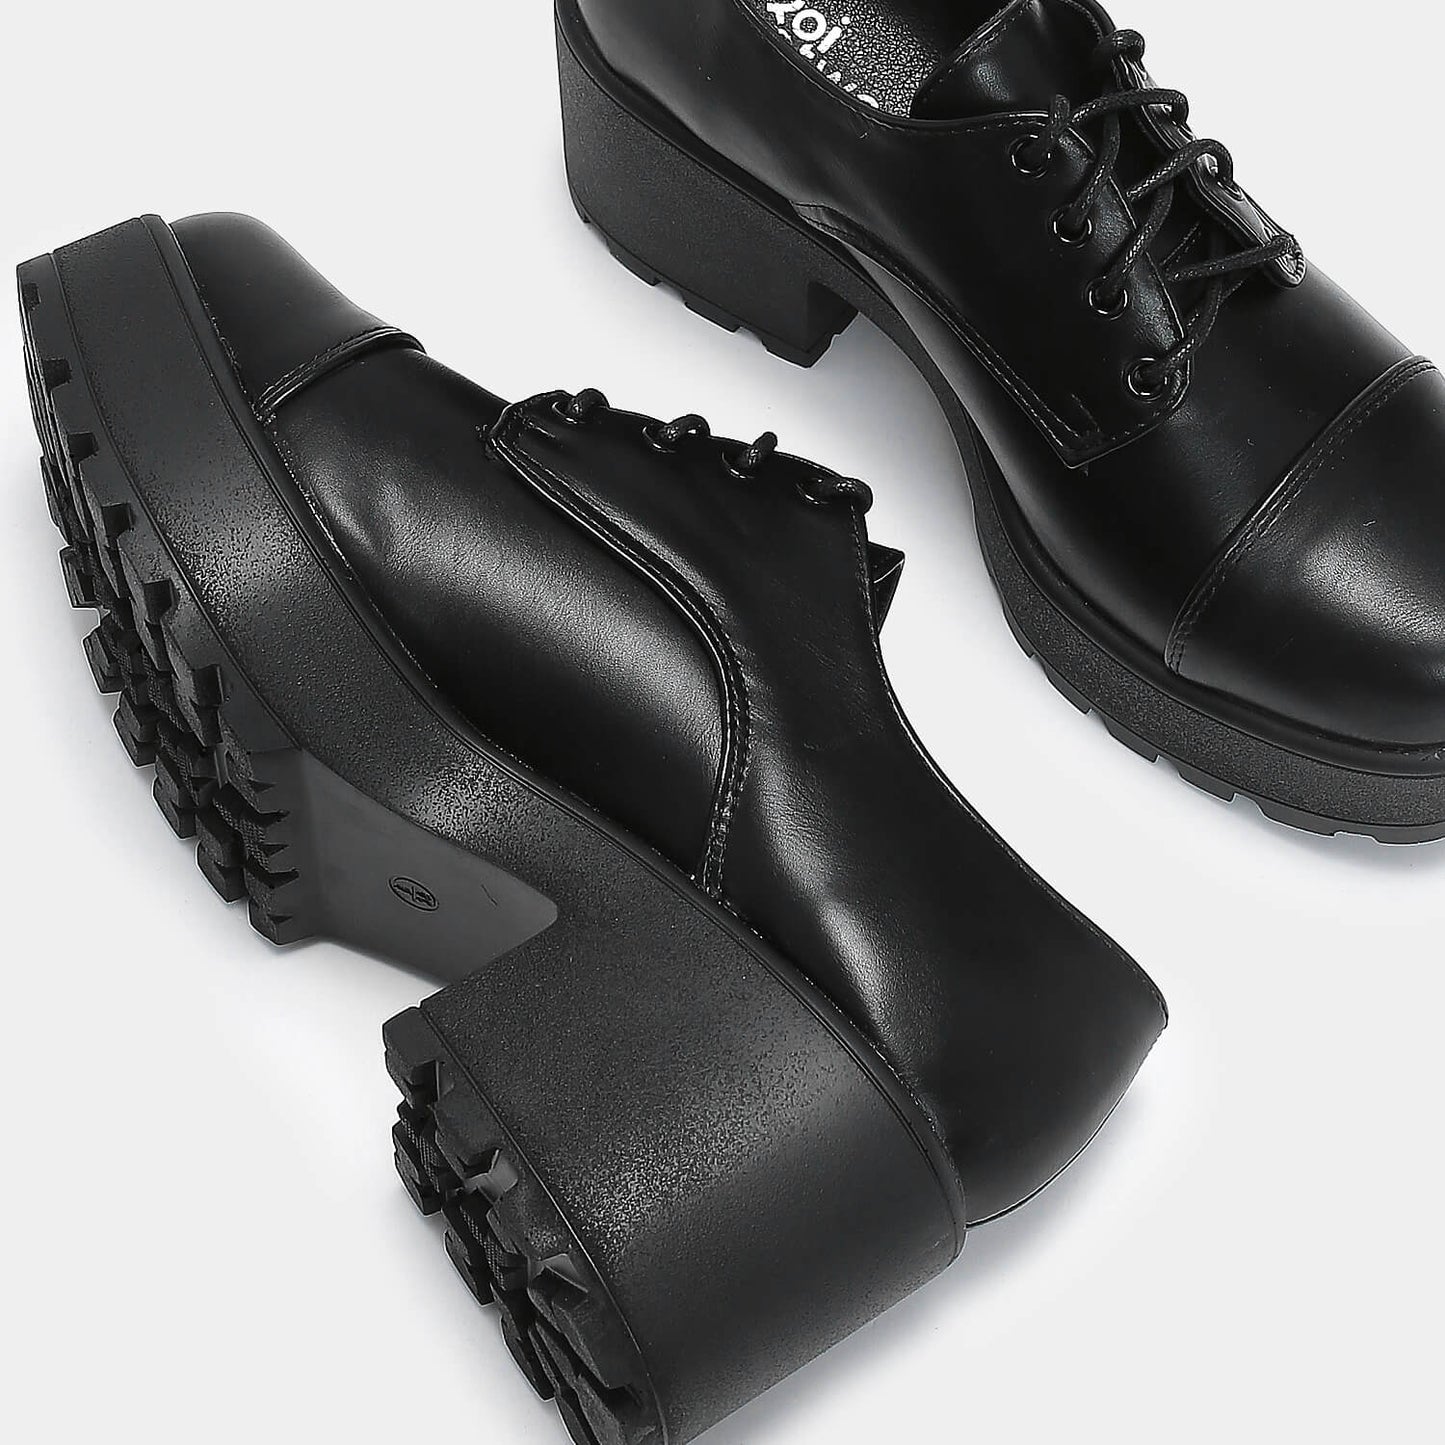 Rei Chunky Lace Up Shoes - Shoes - KOI Footwear - Black - Top View